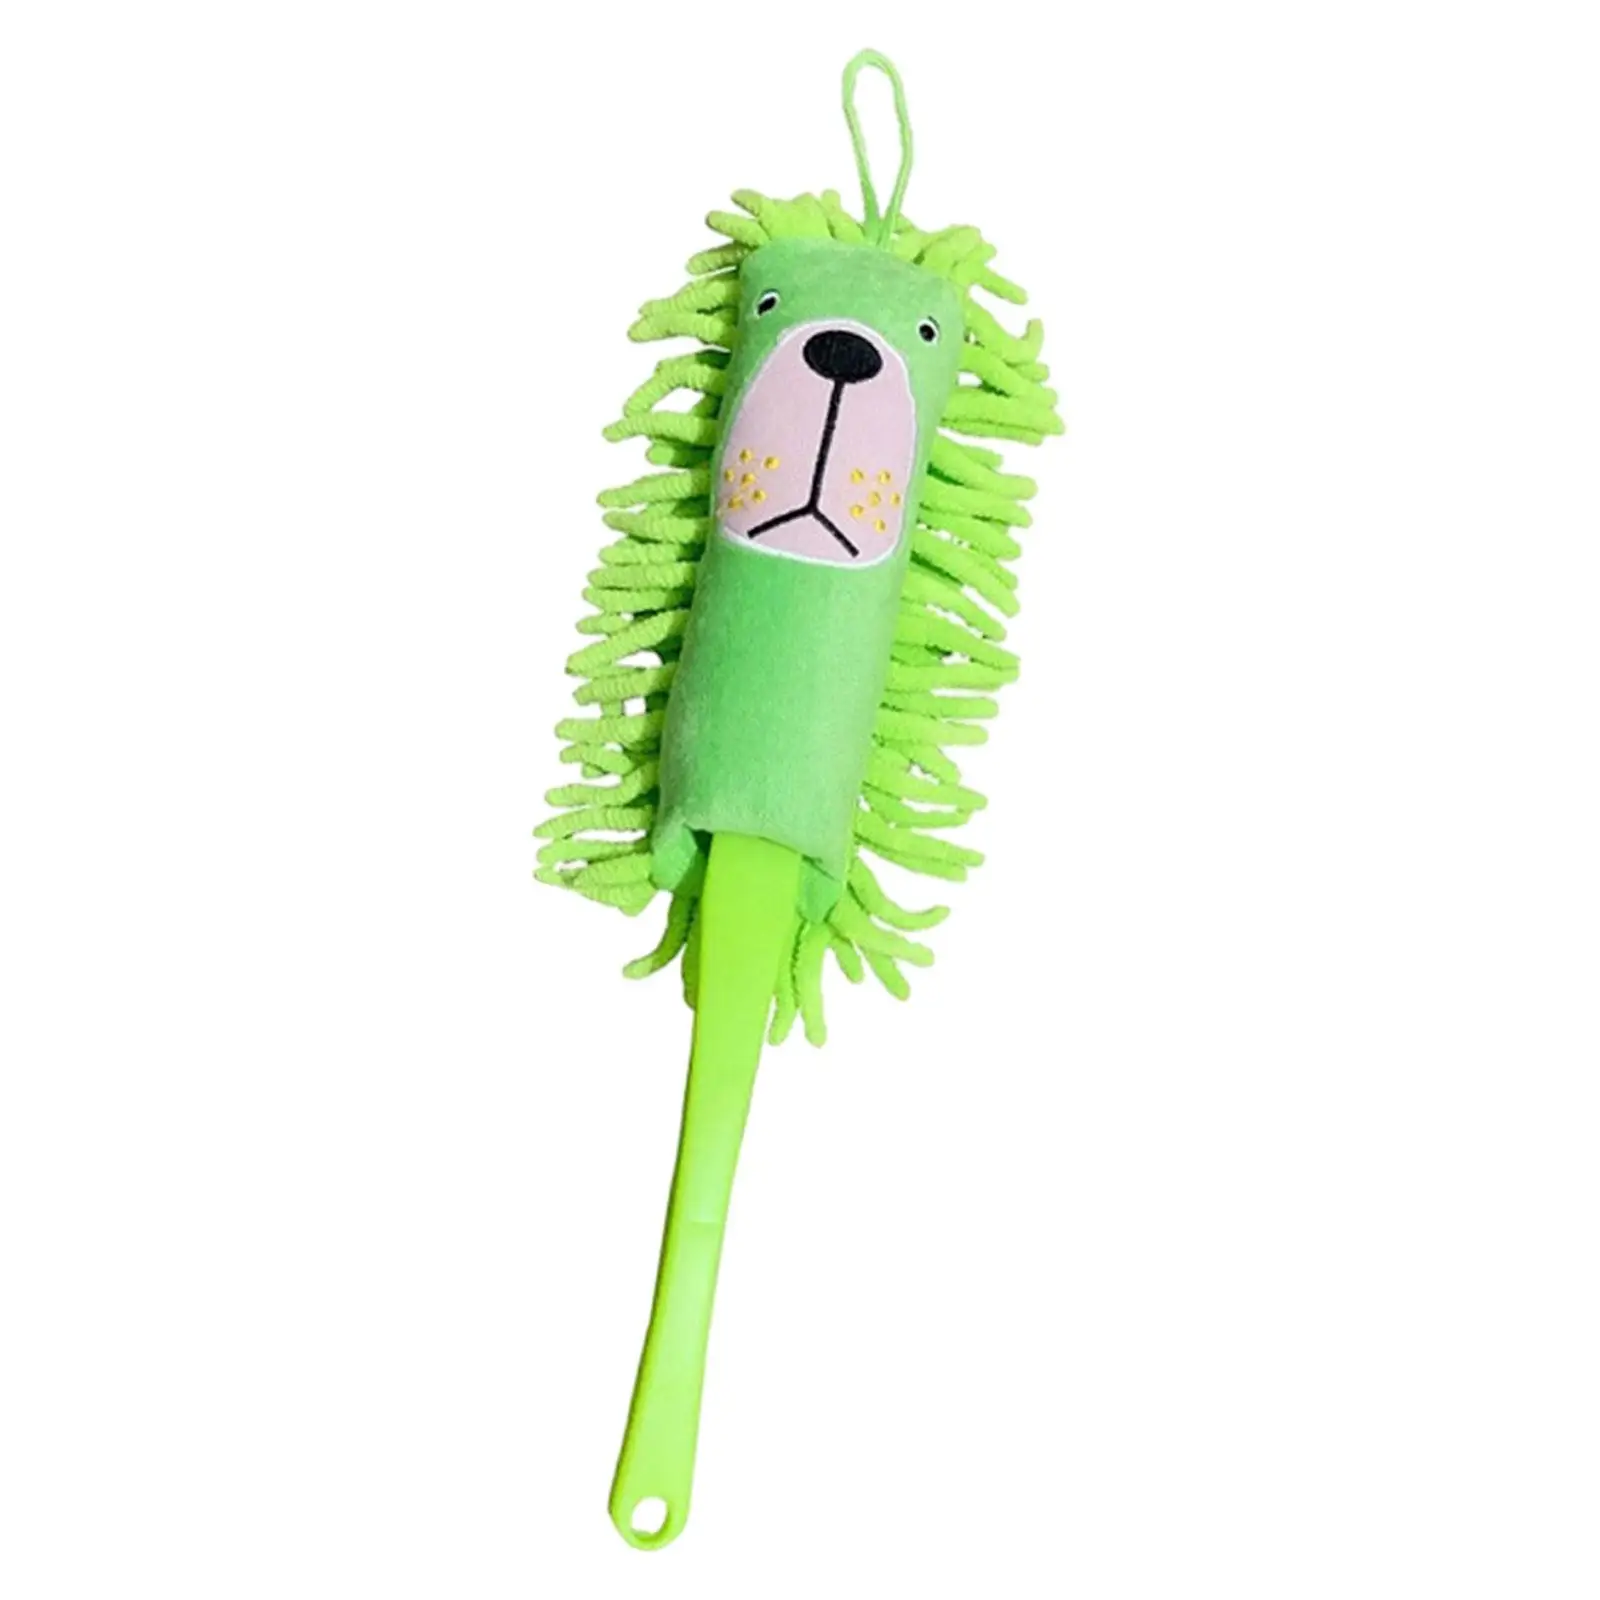 Microfiber Duster Brush Cute Dust Cleaning Brush Multipurpose Washable Duster for Office Kitchen Ceiling Fan Household Computer